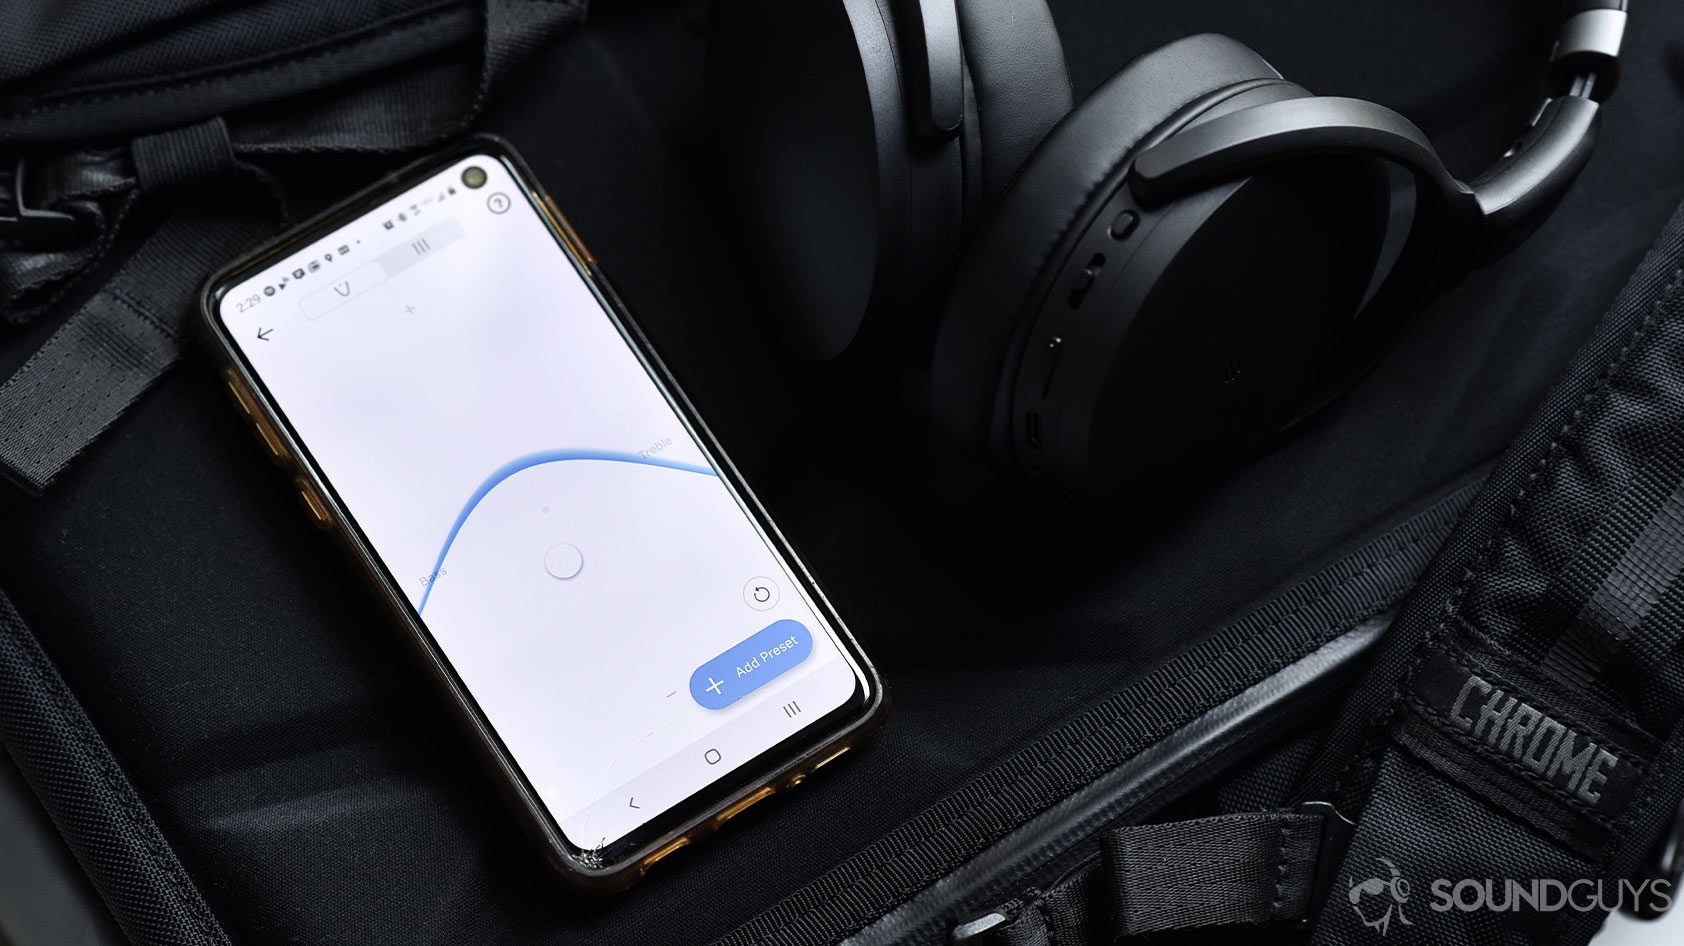 A picture of the Sennheiser HD 450BT noise canceling headphones next to a Samsung Galaxy S10e smartphone with the Sennheiser app and EQ on display.